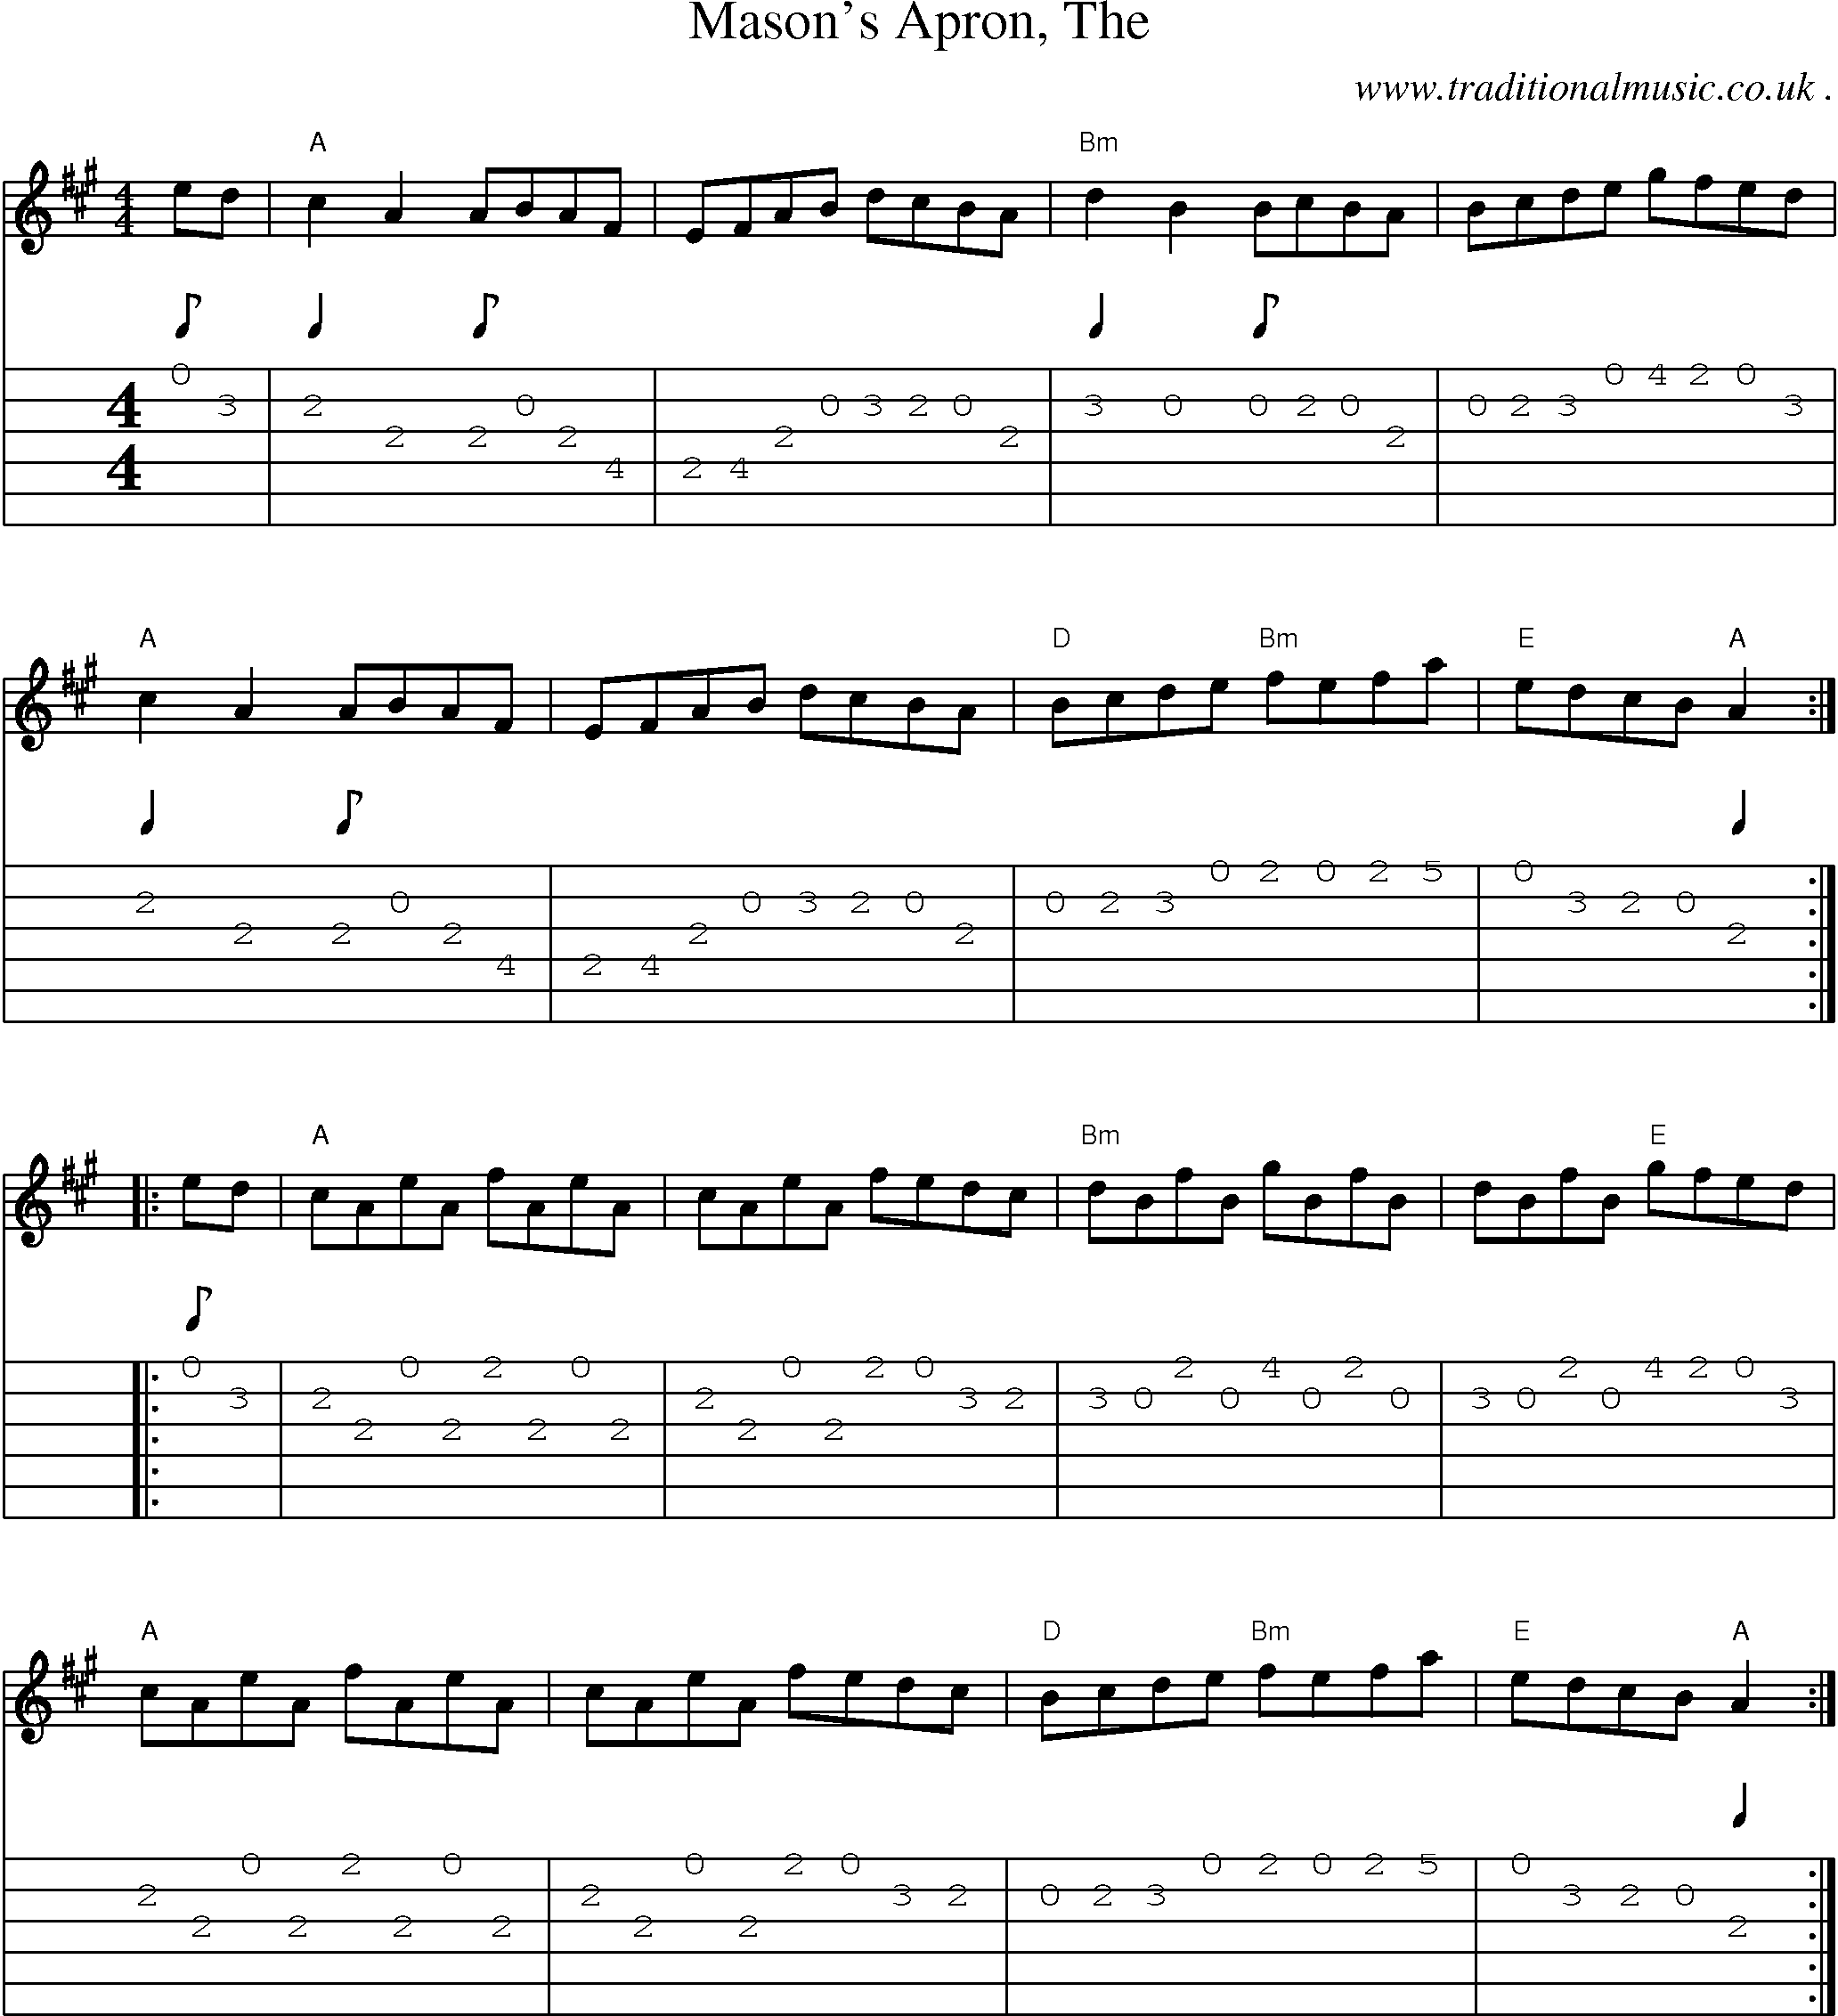 Music Score and Guitar Tabs for Masons Apron The1